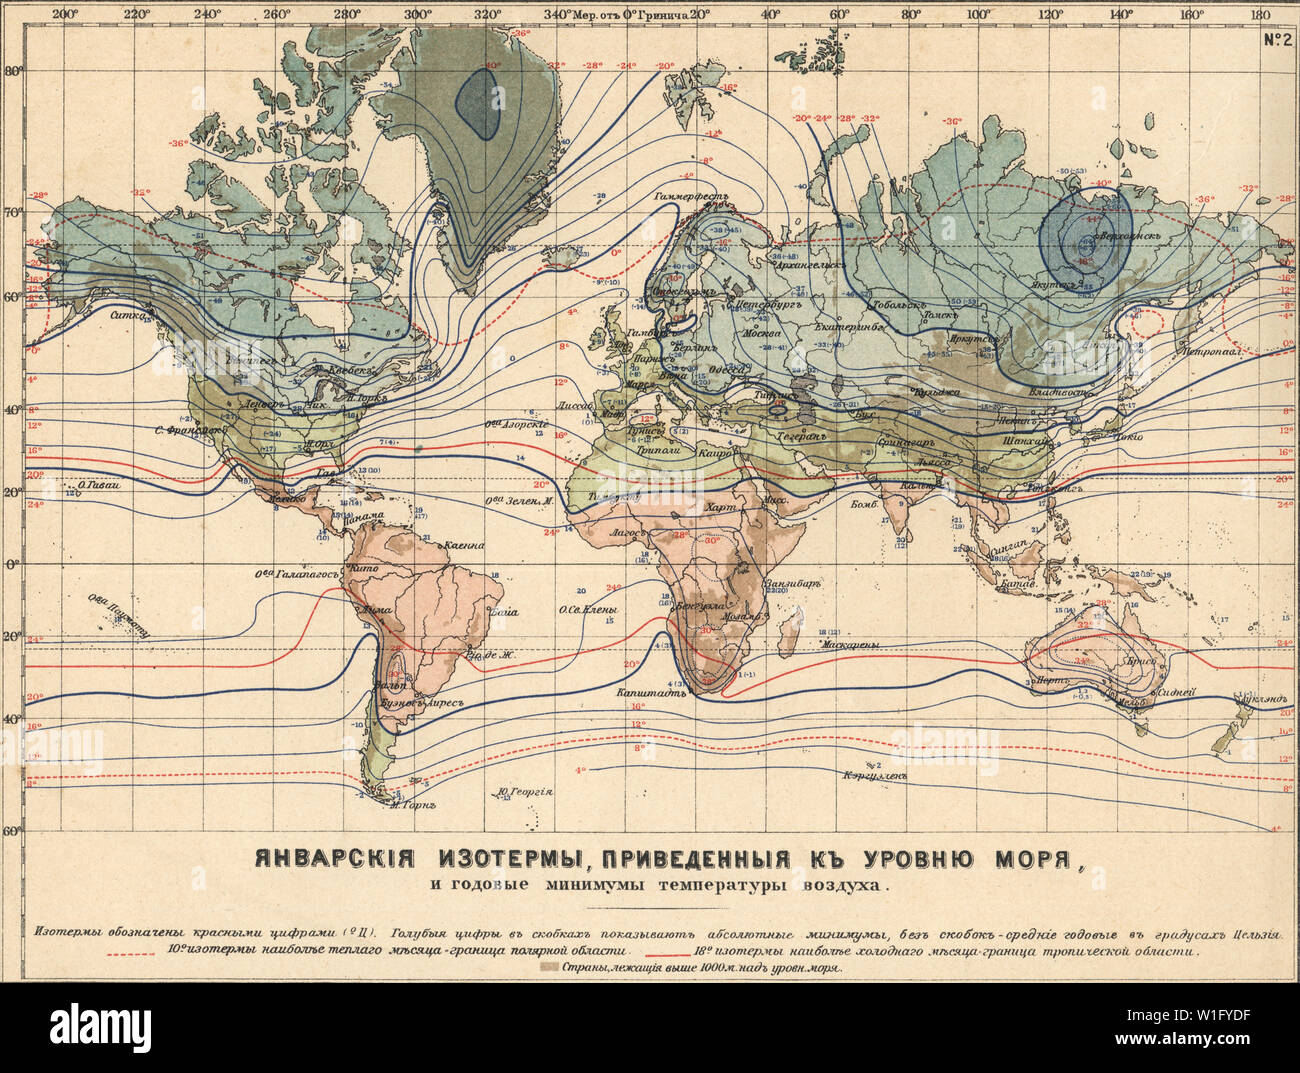 Earth Climatology Maps Map of the January isotherms given to the level of the sea New table atlas A.F. Marcks St. Petersburg, 1910 Stock Photo